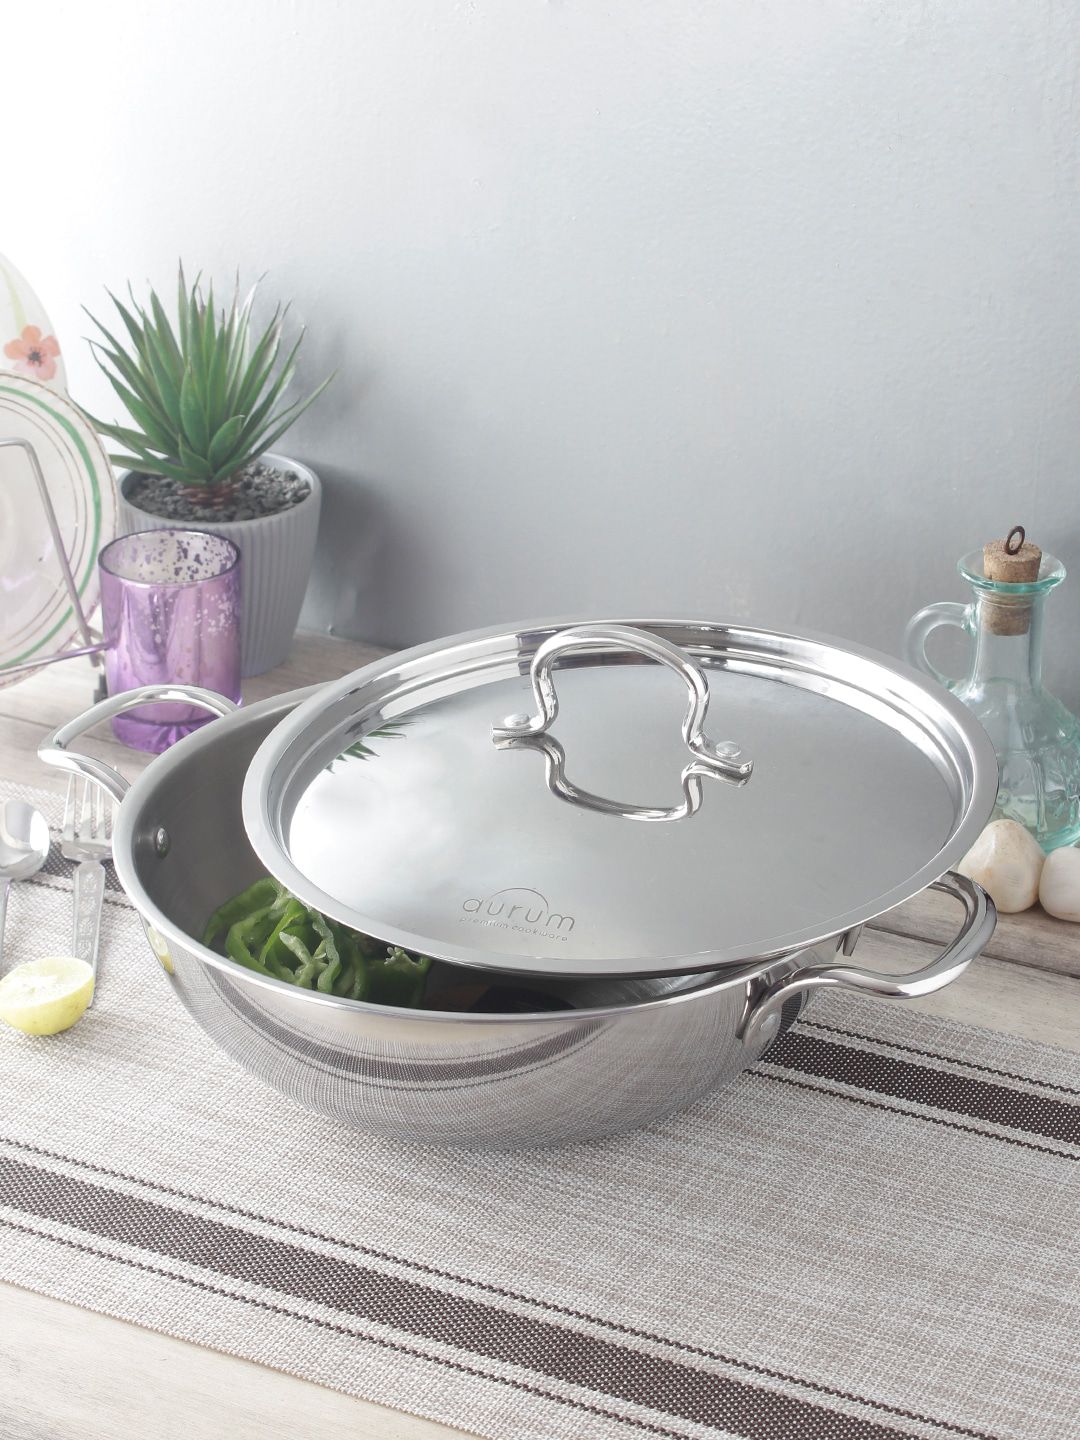 AURUM Silver-Toned Triply Kadai with Stainless Steel Lid 2.2 Litre Price in India